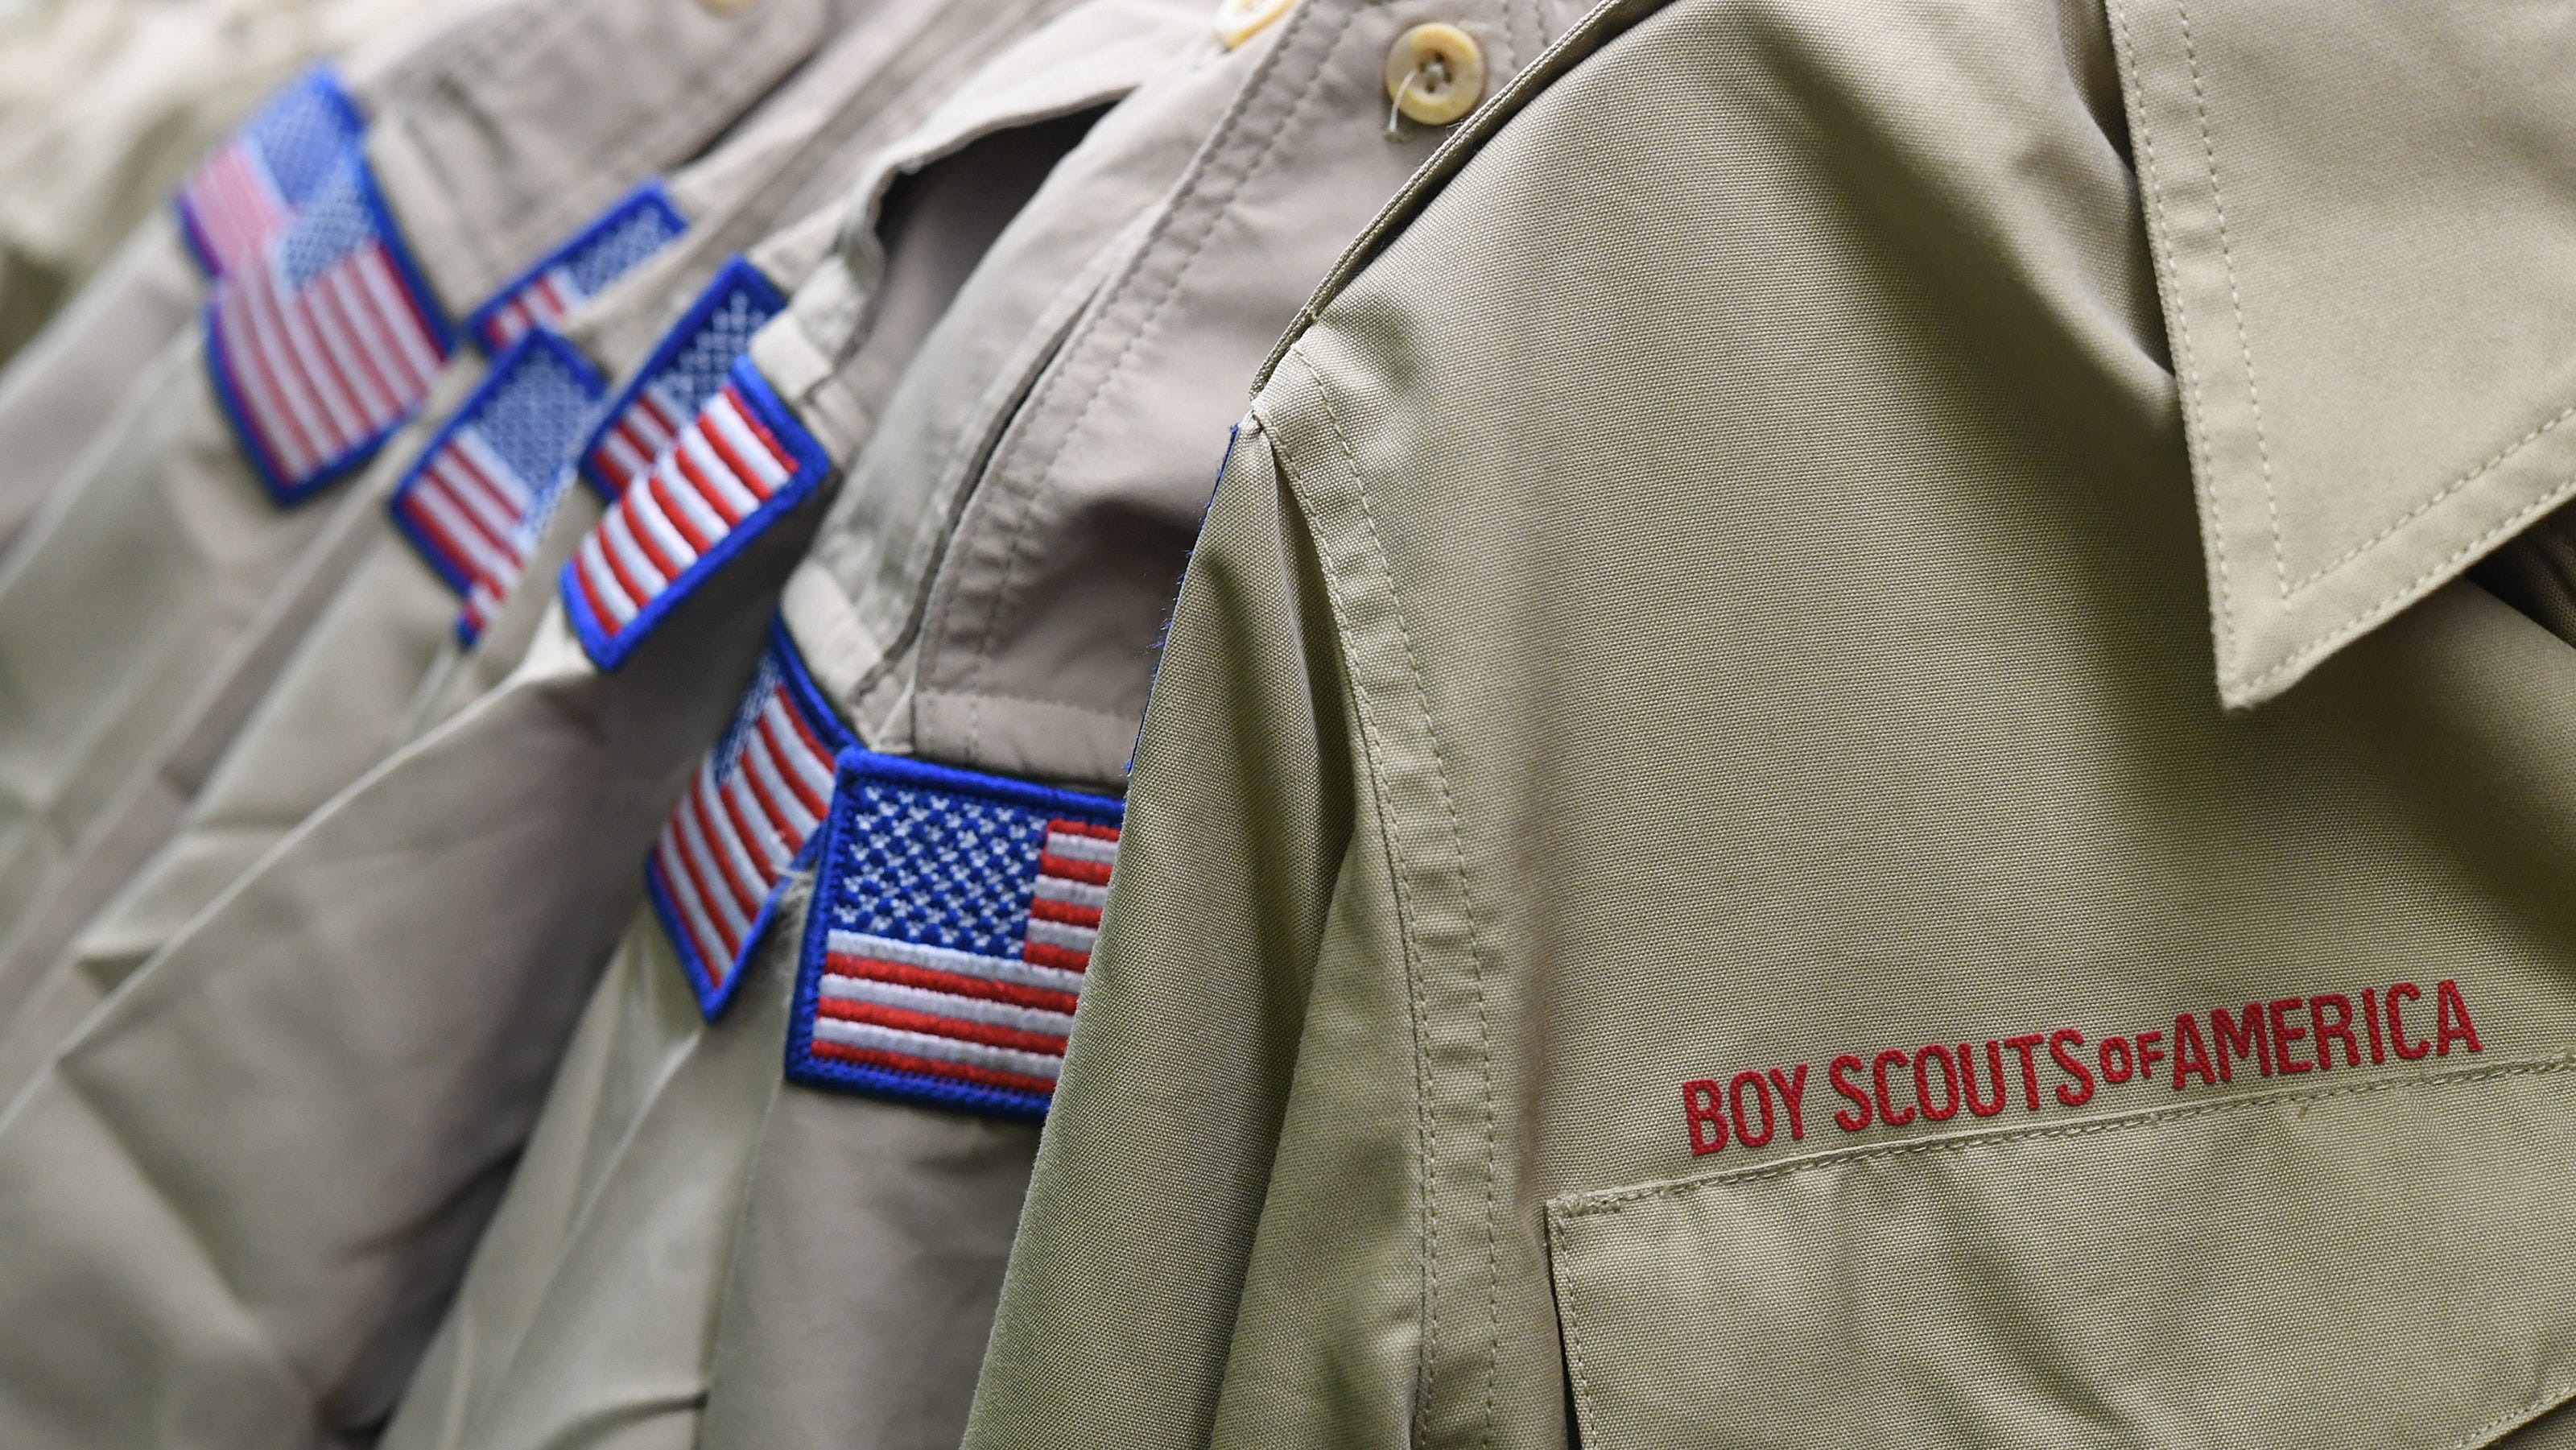 Boy Scouts of America announces name change to Scouting America, in effect next year